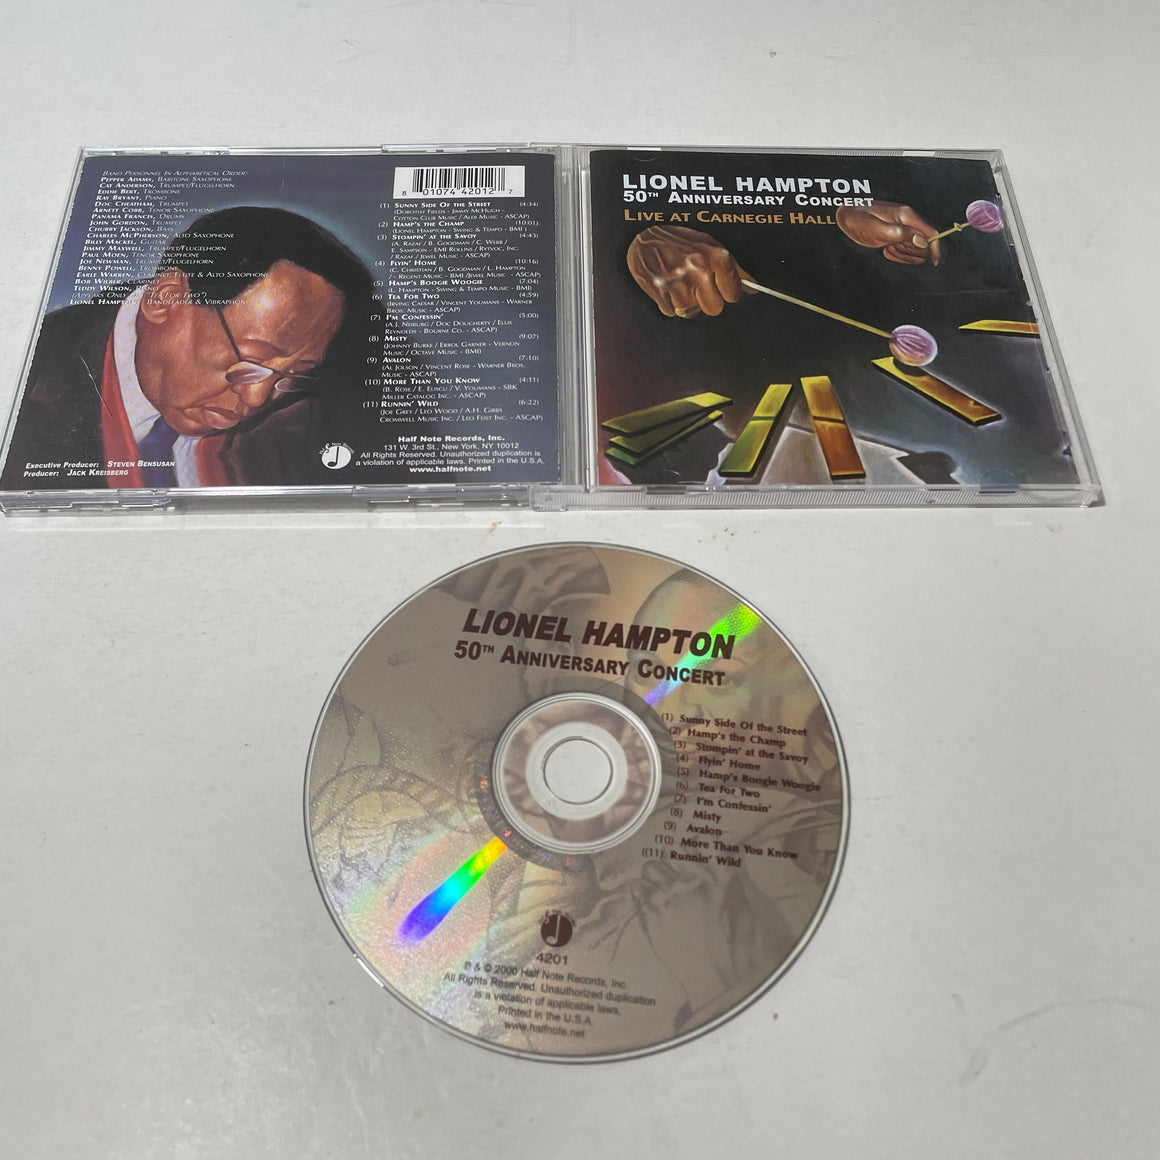 Lionel Hampton 50th Anniversary Concert Live At Carnegie Hall Used CD VG+\VG+